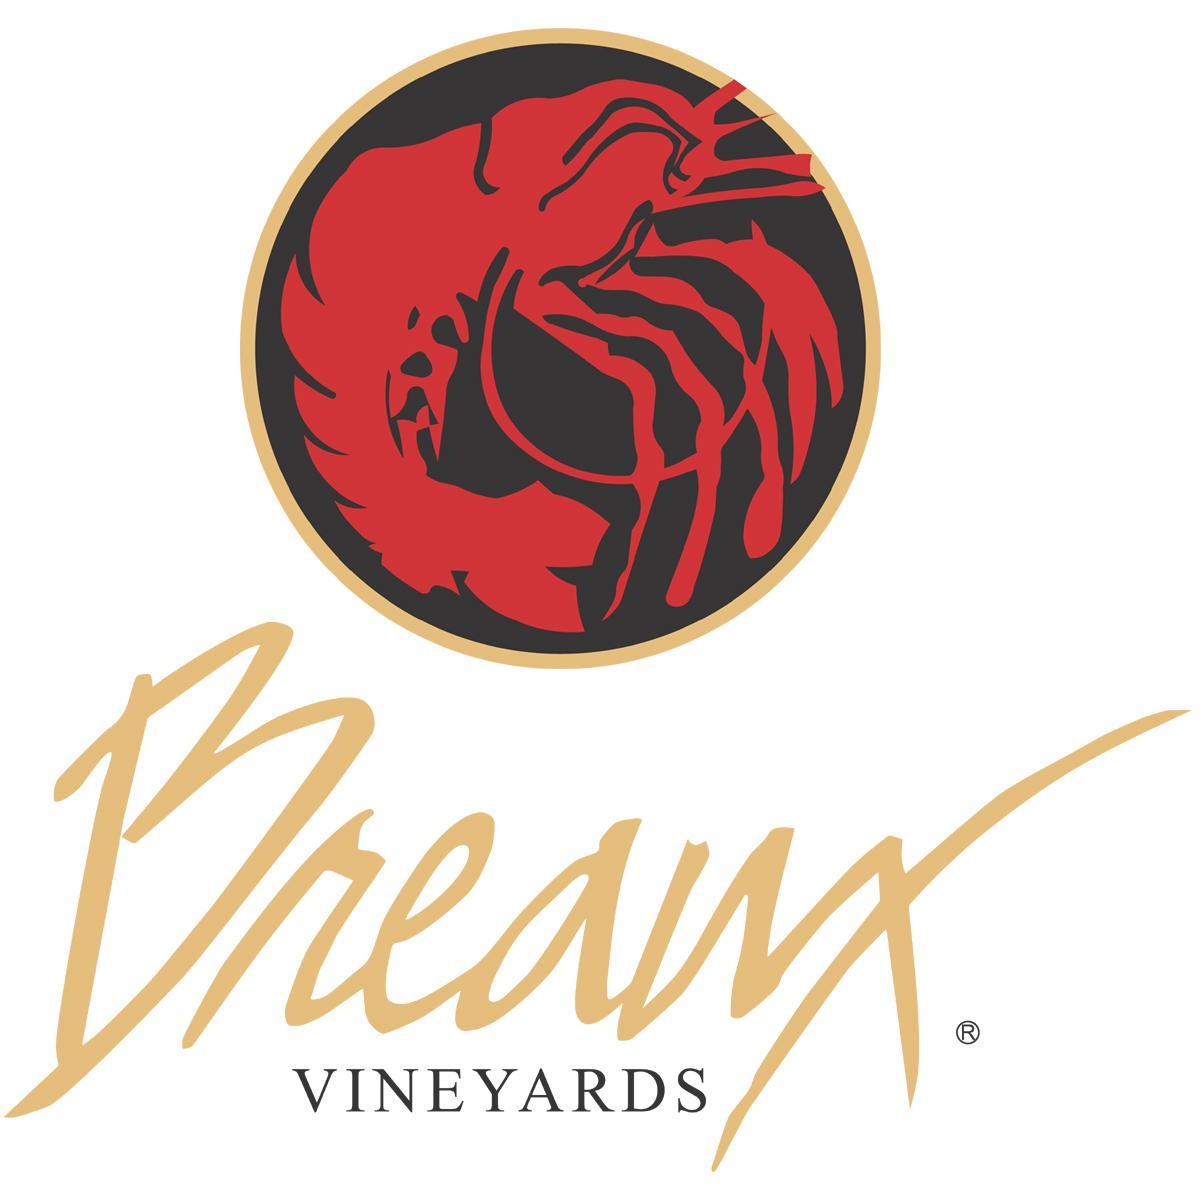 Breaux Vineyards is a 2nd generation, Cajun owned vineyard and winery, established in '97 and fueled by our passion of the grape from vine to bottle ever since.